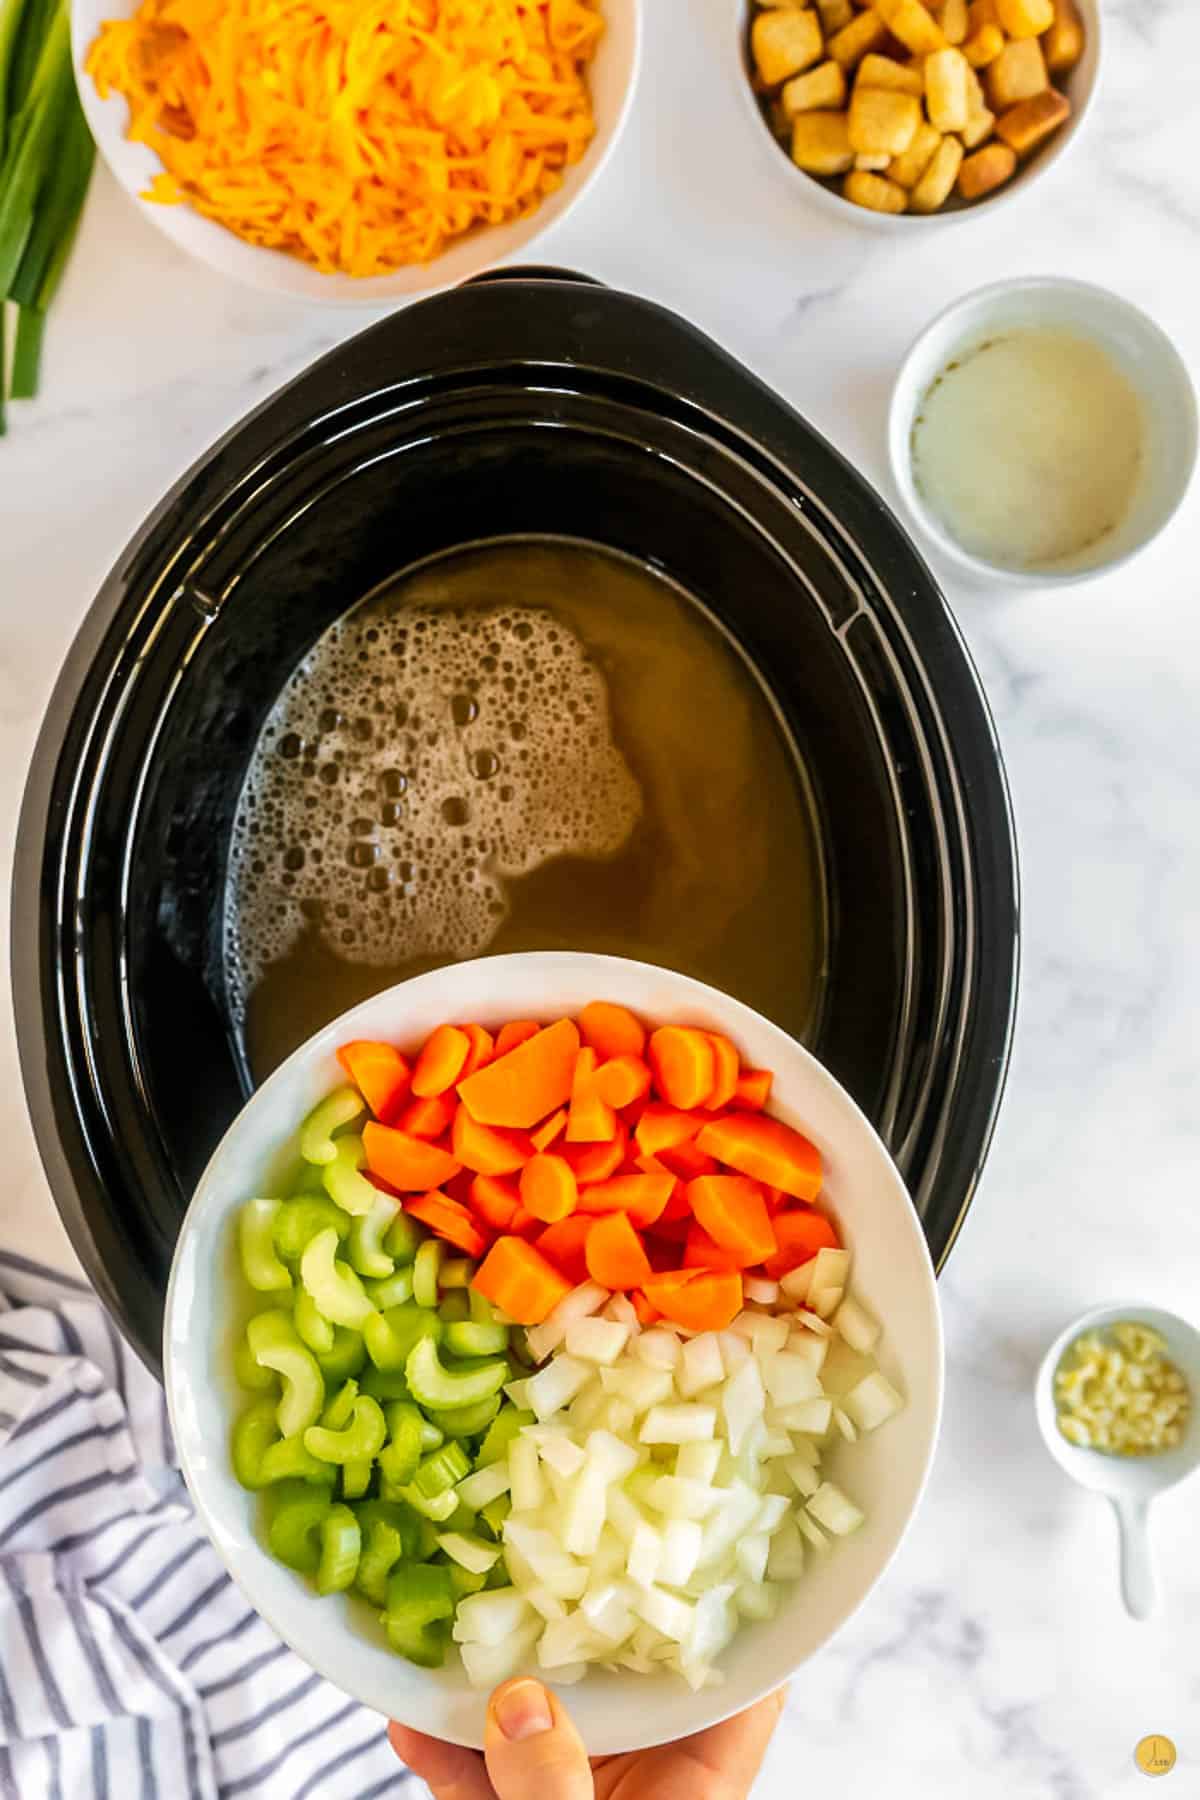 celery, carrots, and onion being poured into a crock pot